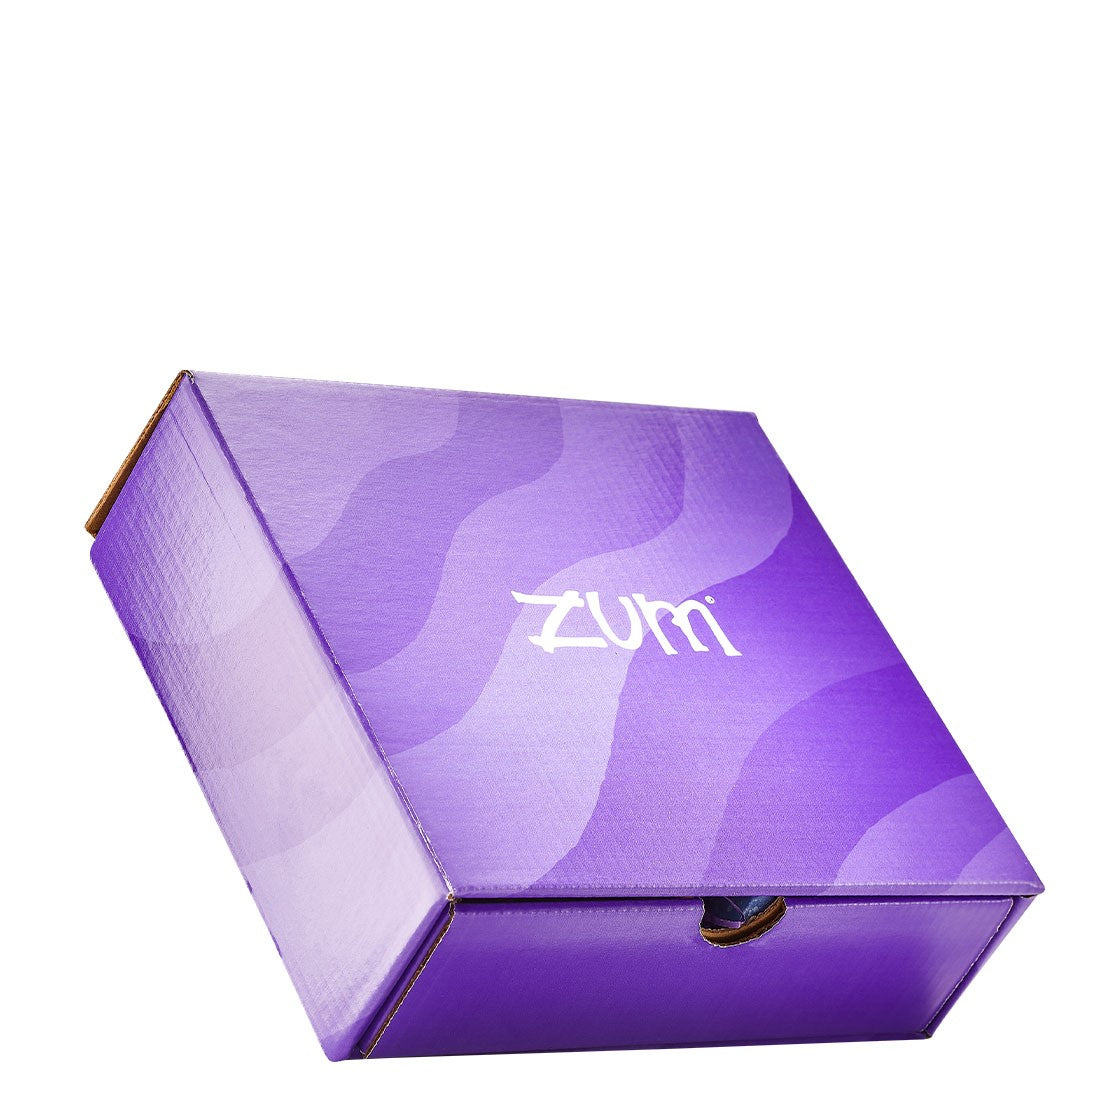 Outside of gift box with purple waves and Zum logo.